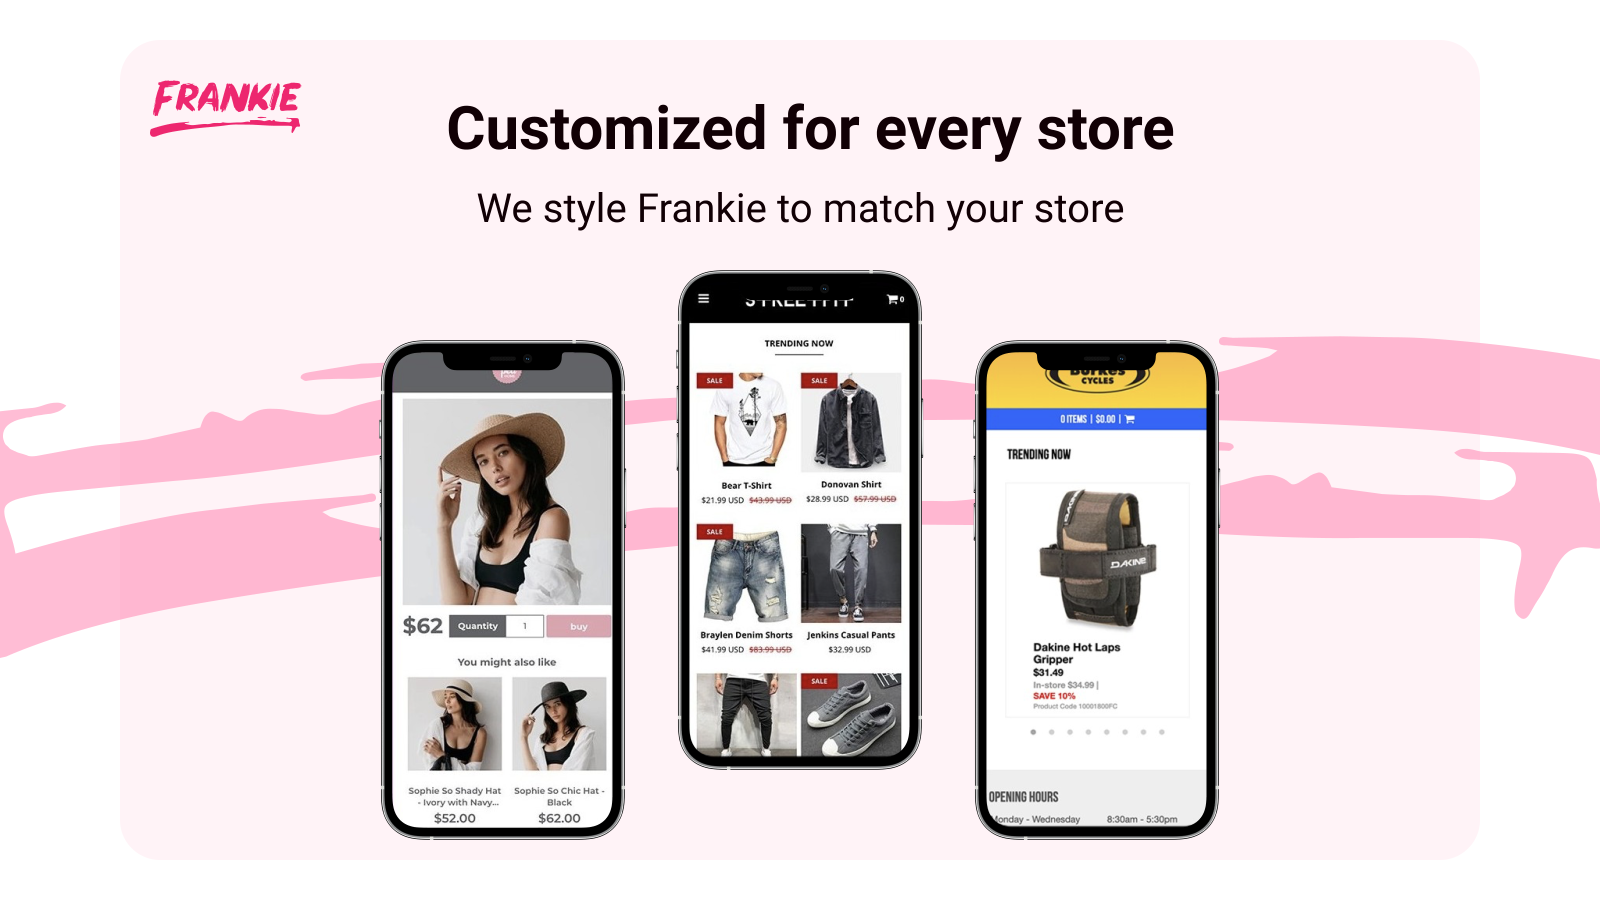 Personalized AI Recommendations customized to your store